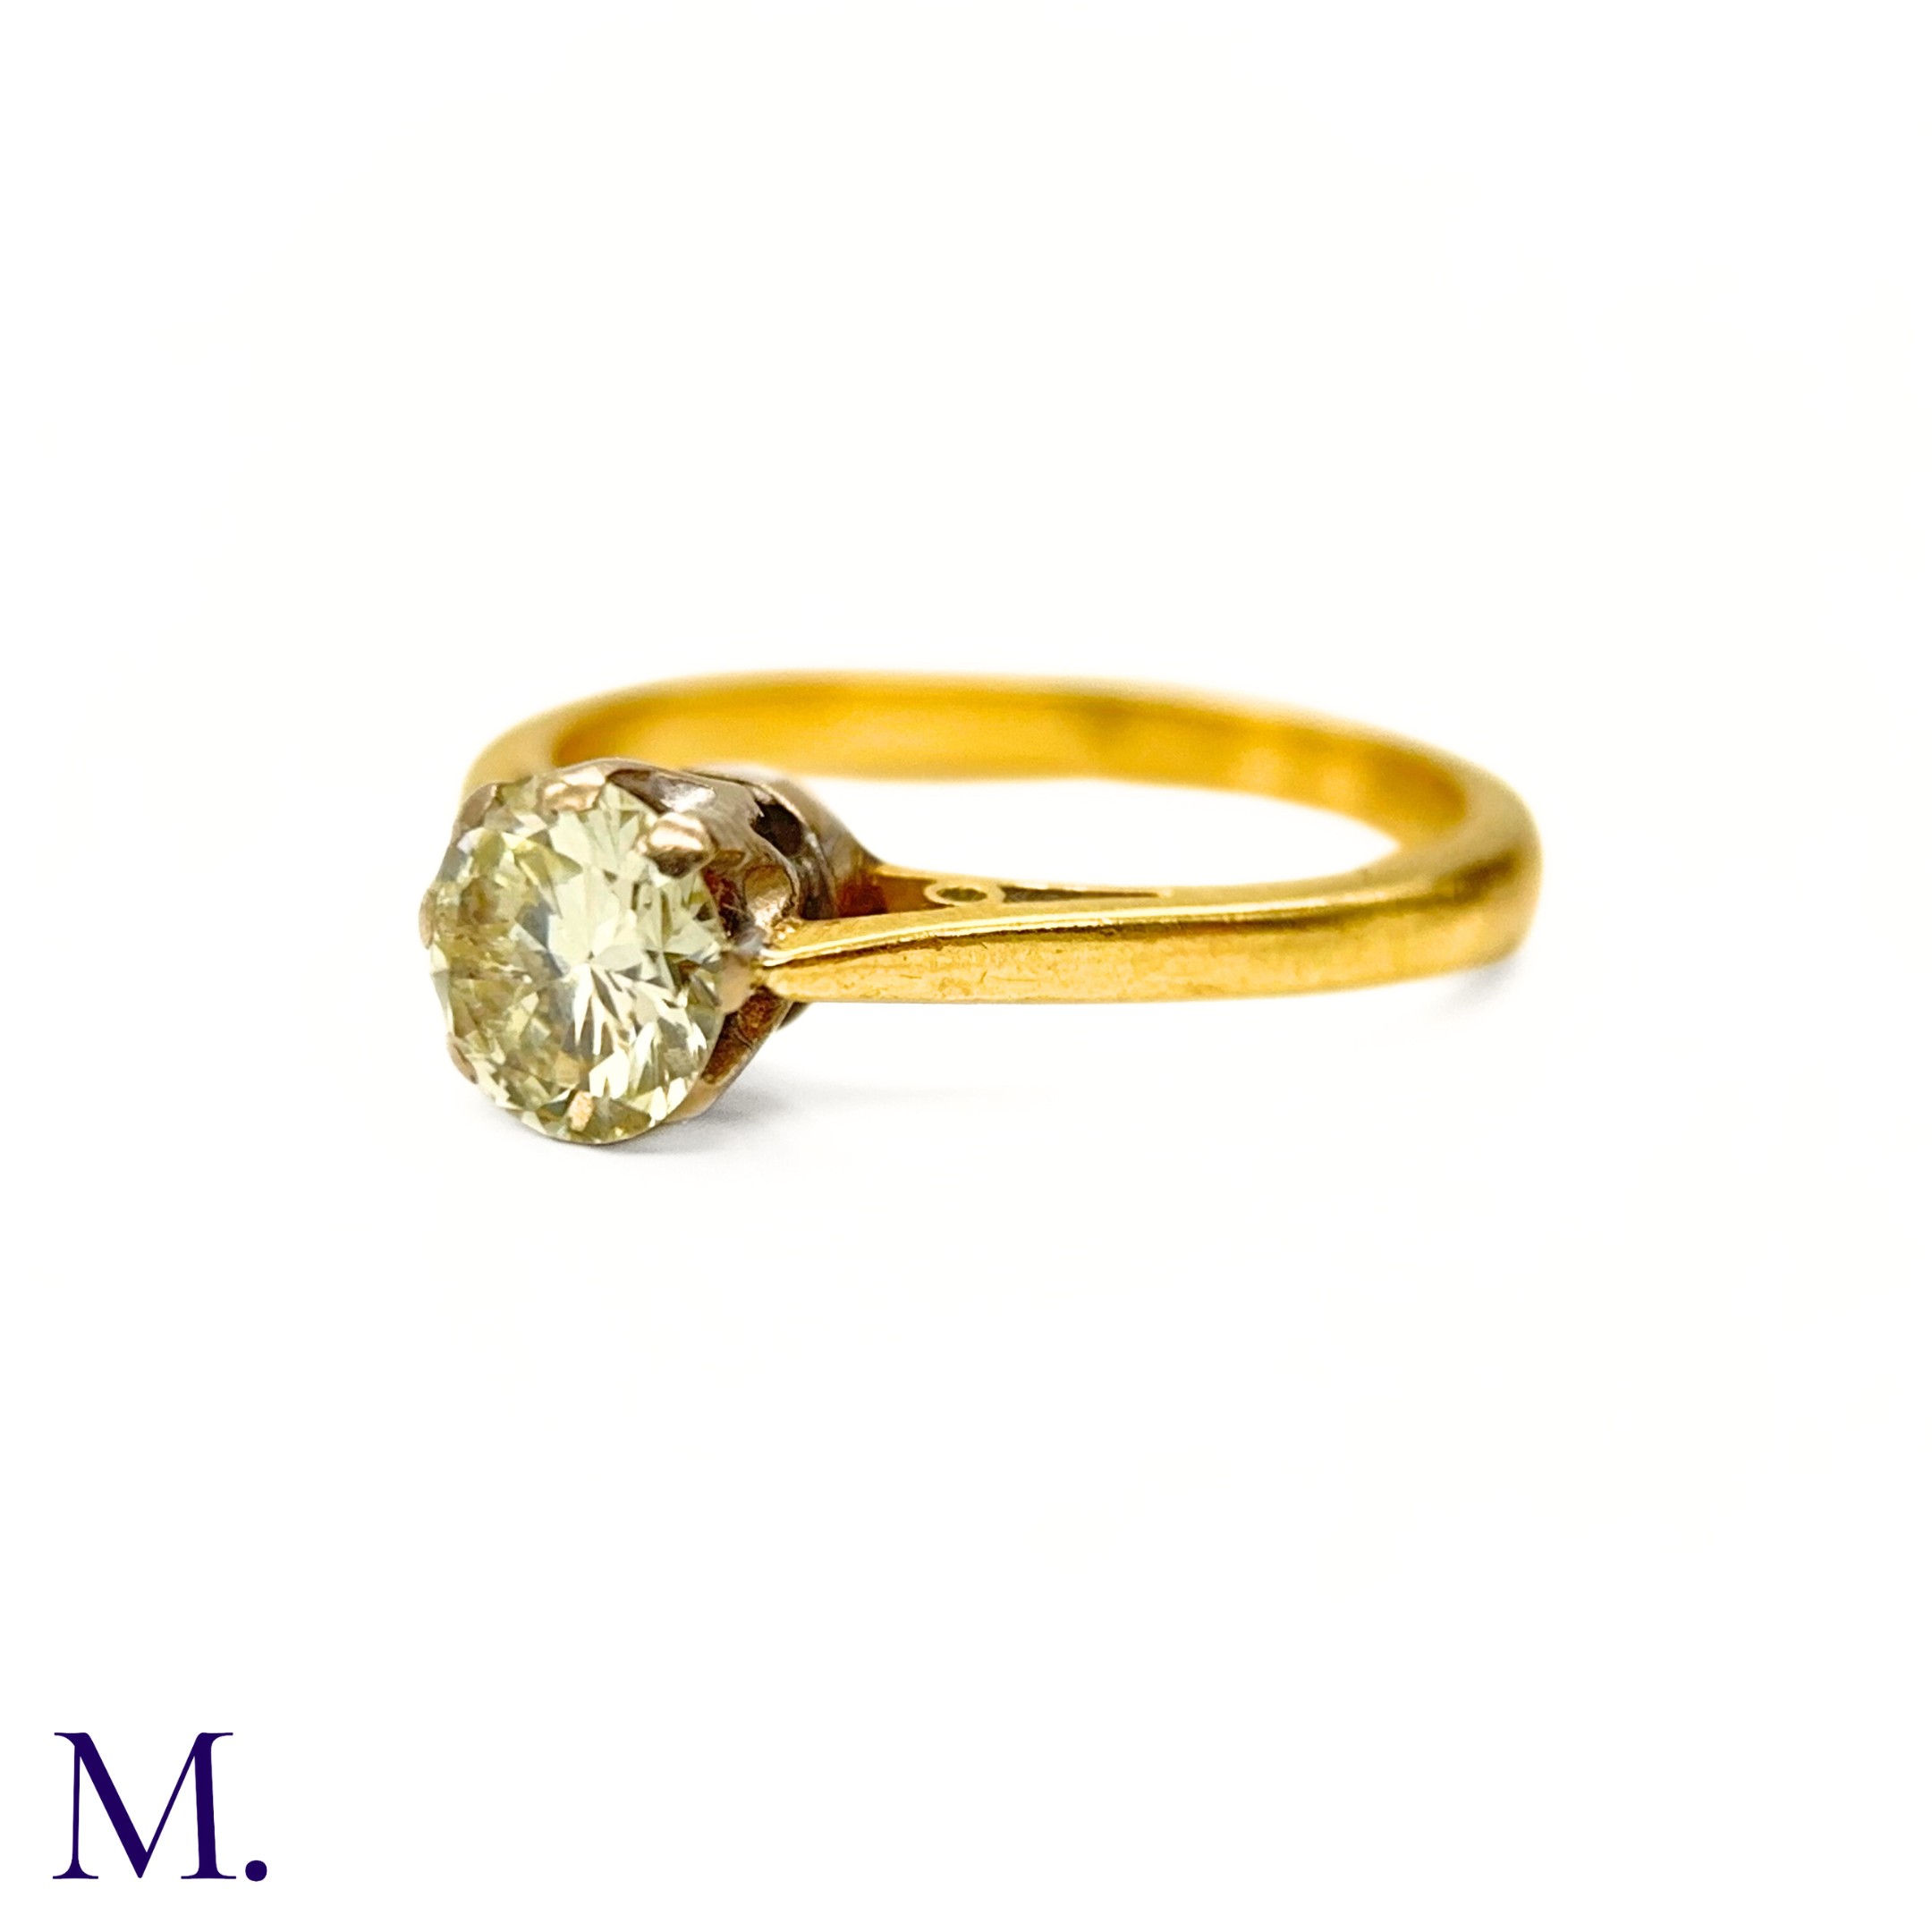 A Solitaire Ring (c. 0.75ct) - Image 5 of 6